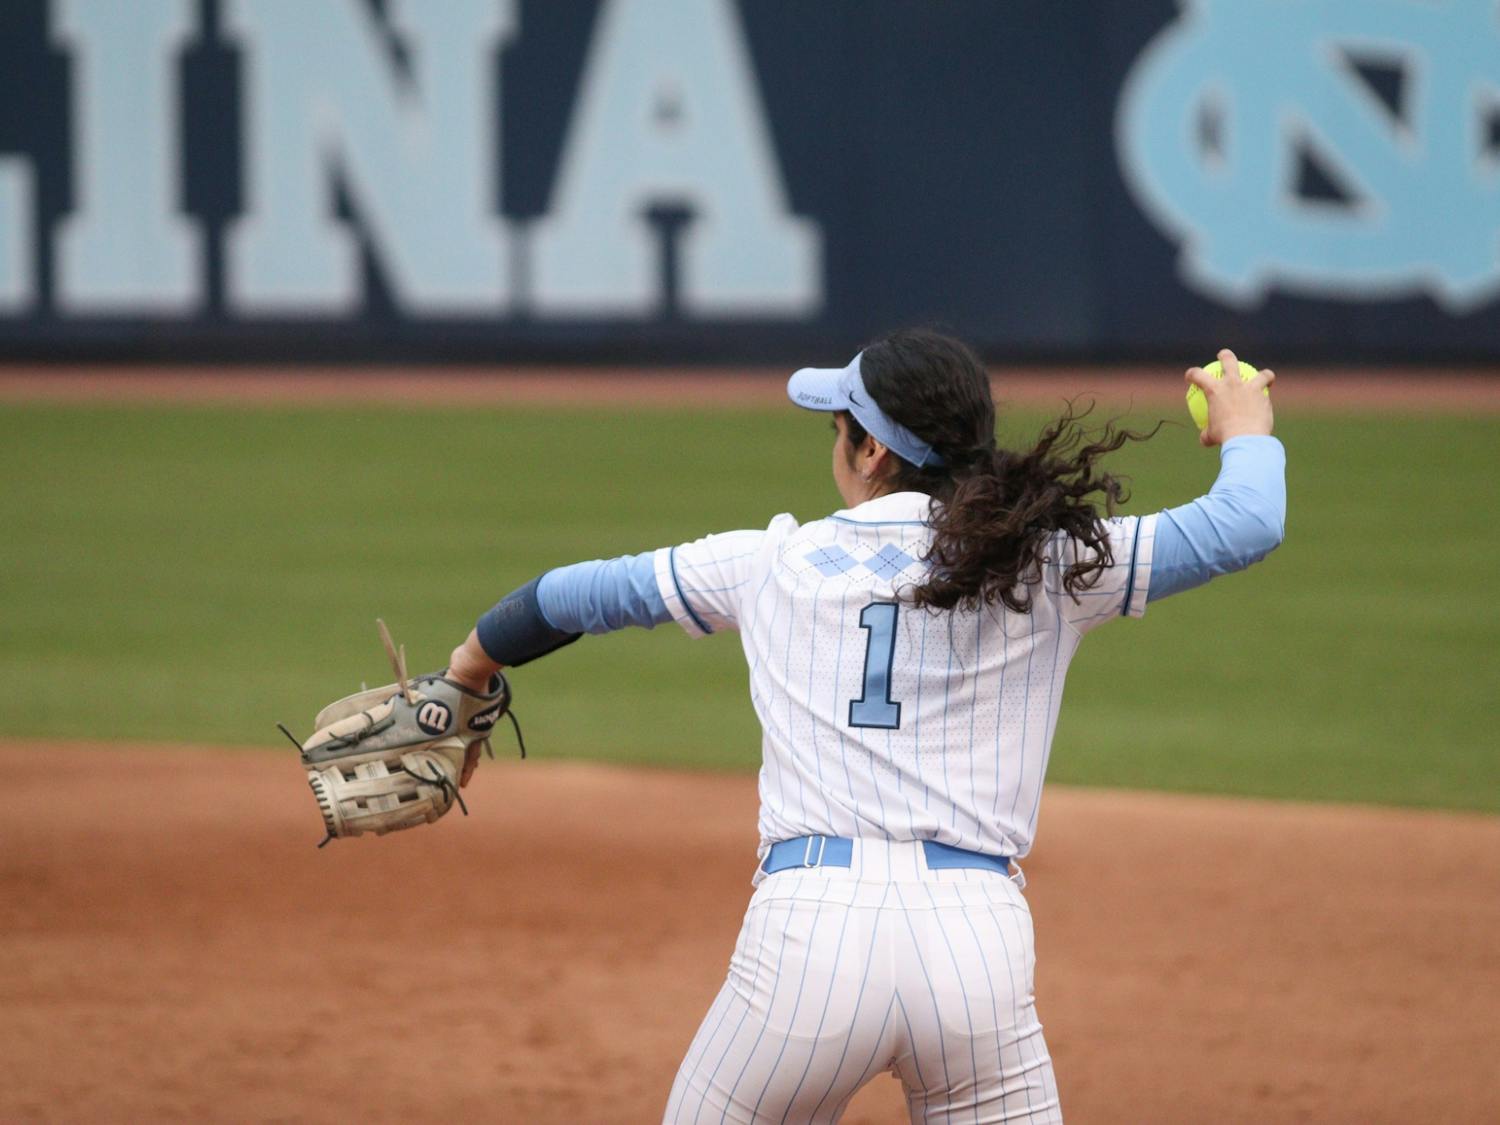 First baseman Kiersten Licea (1) gets ready to throw the ball back to the pitcher's mound during a home game against UNCW. The Heels won 2-0 on Tuesday, March 15, 2022.